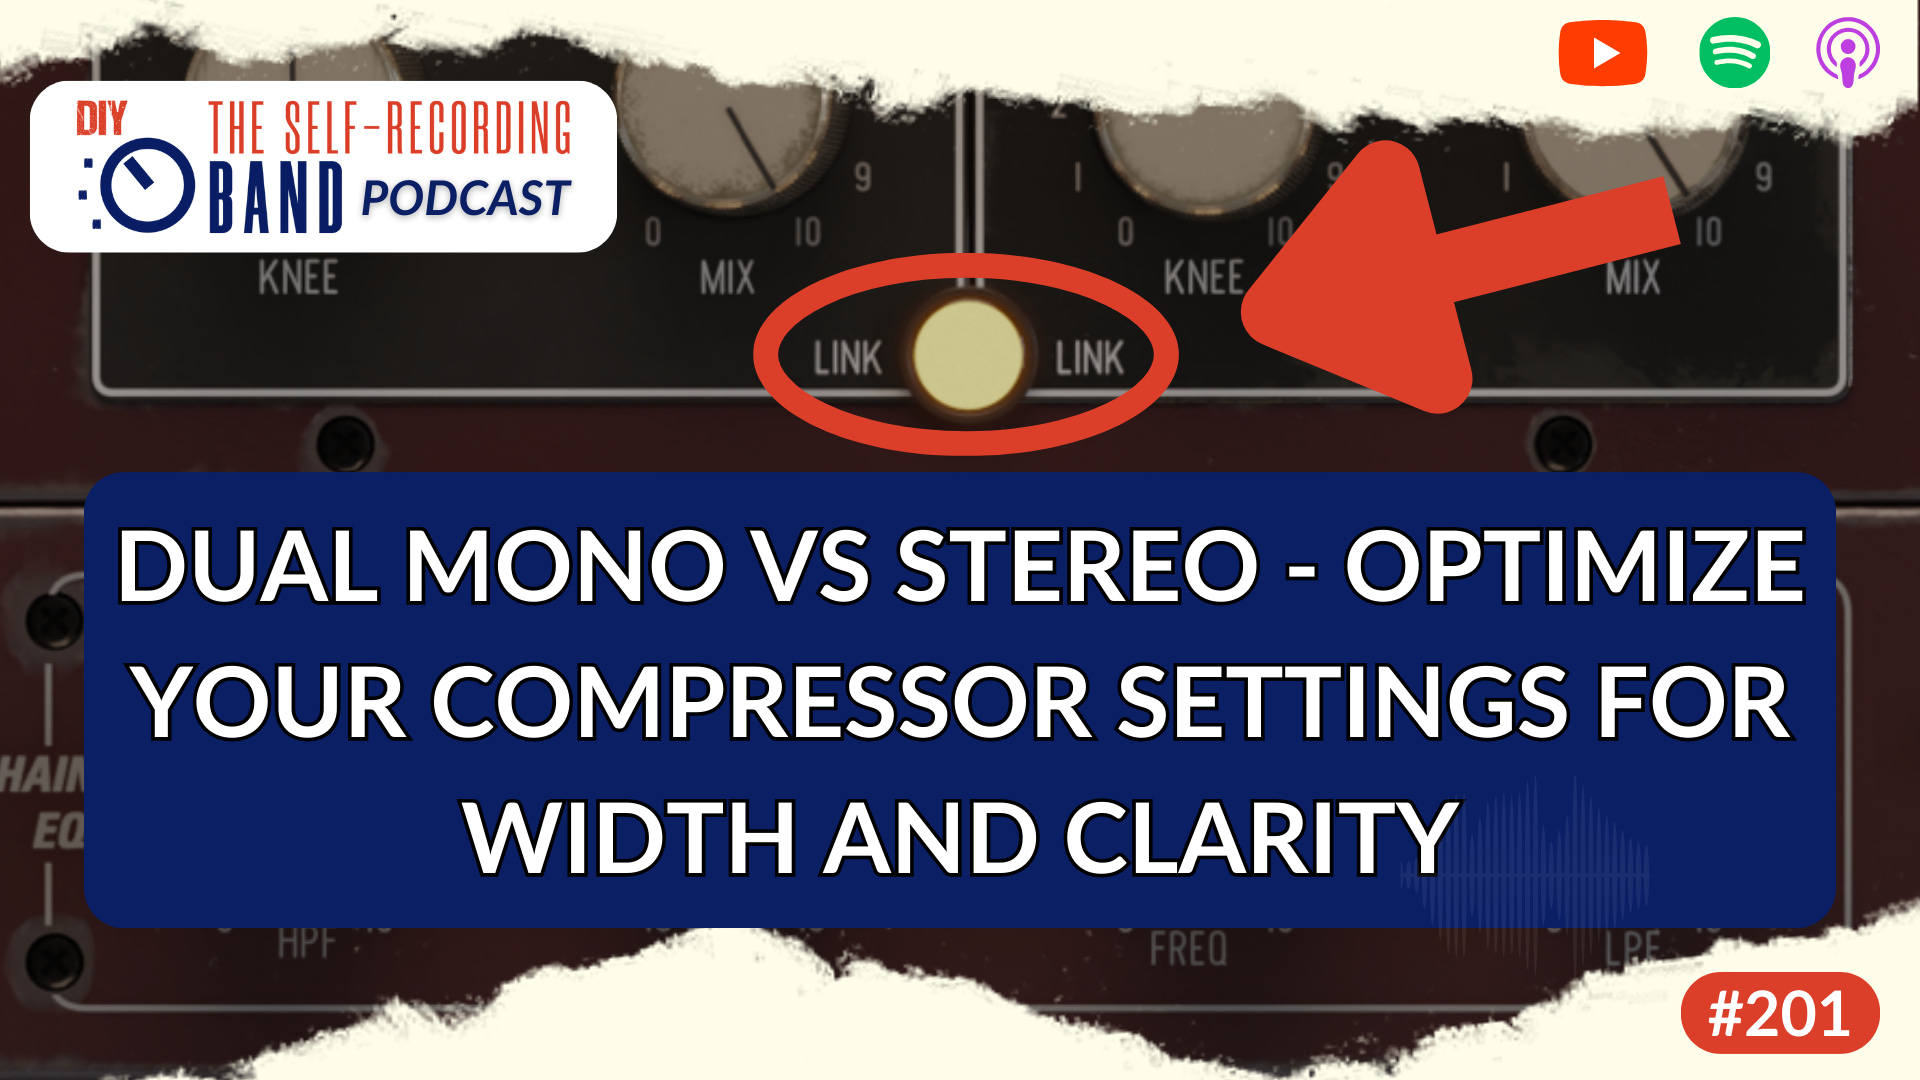 201: DUAL MONO VS STEREO – GAIN FULL CONTROL OVER YOUR STEREO IMAGE BY SETTING UP YOUR COMPRESSORS THE RIGHT WAY